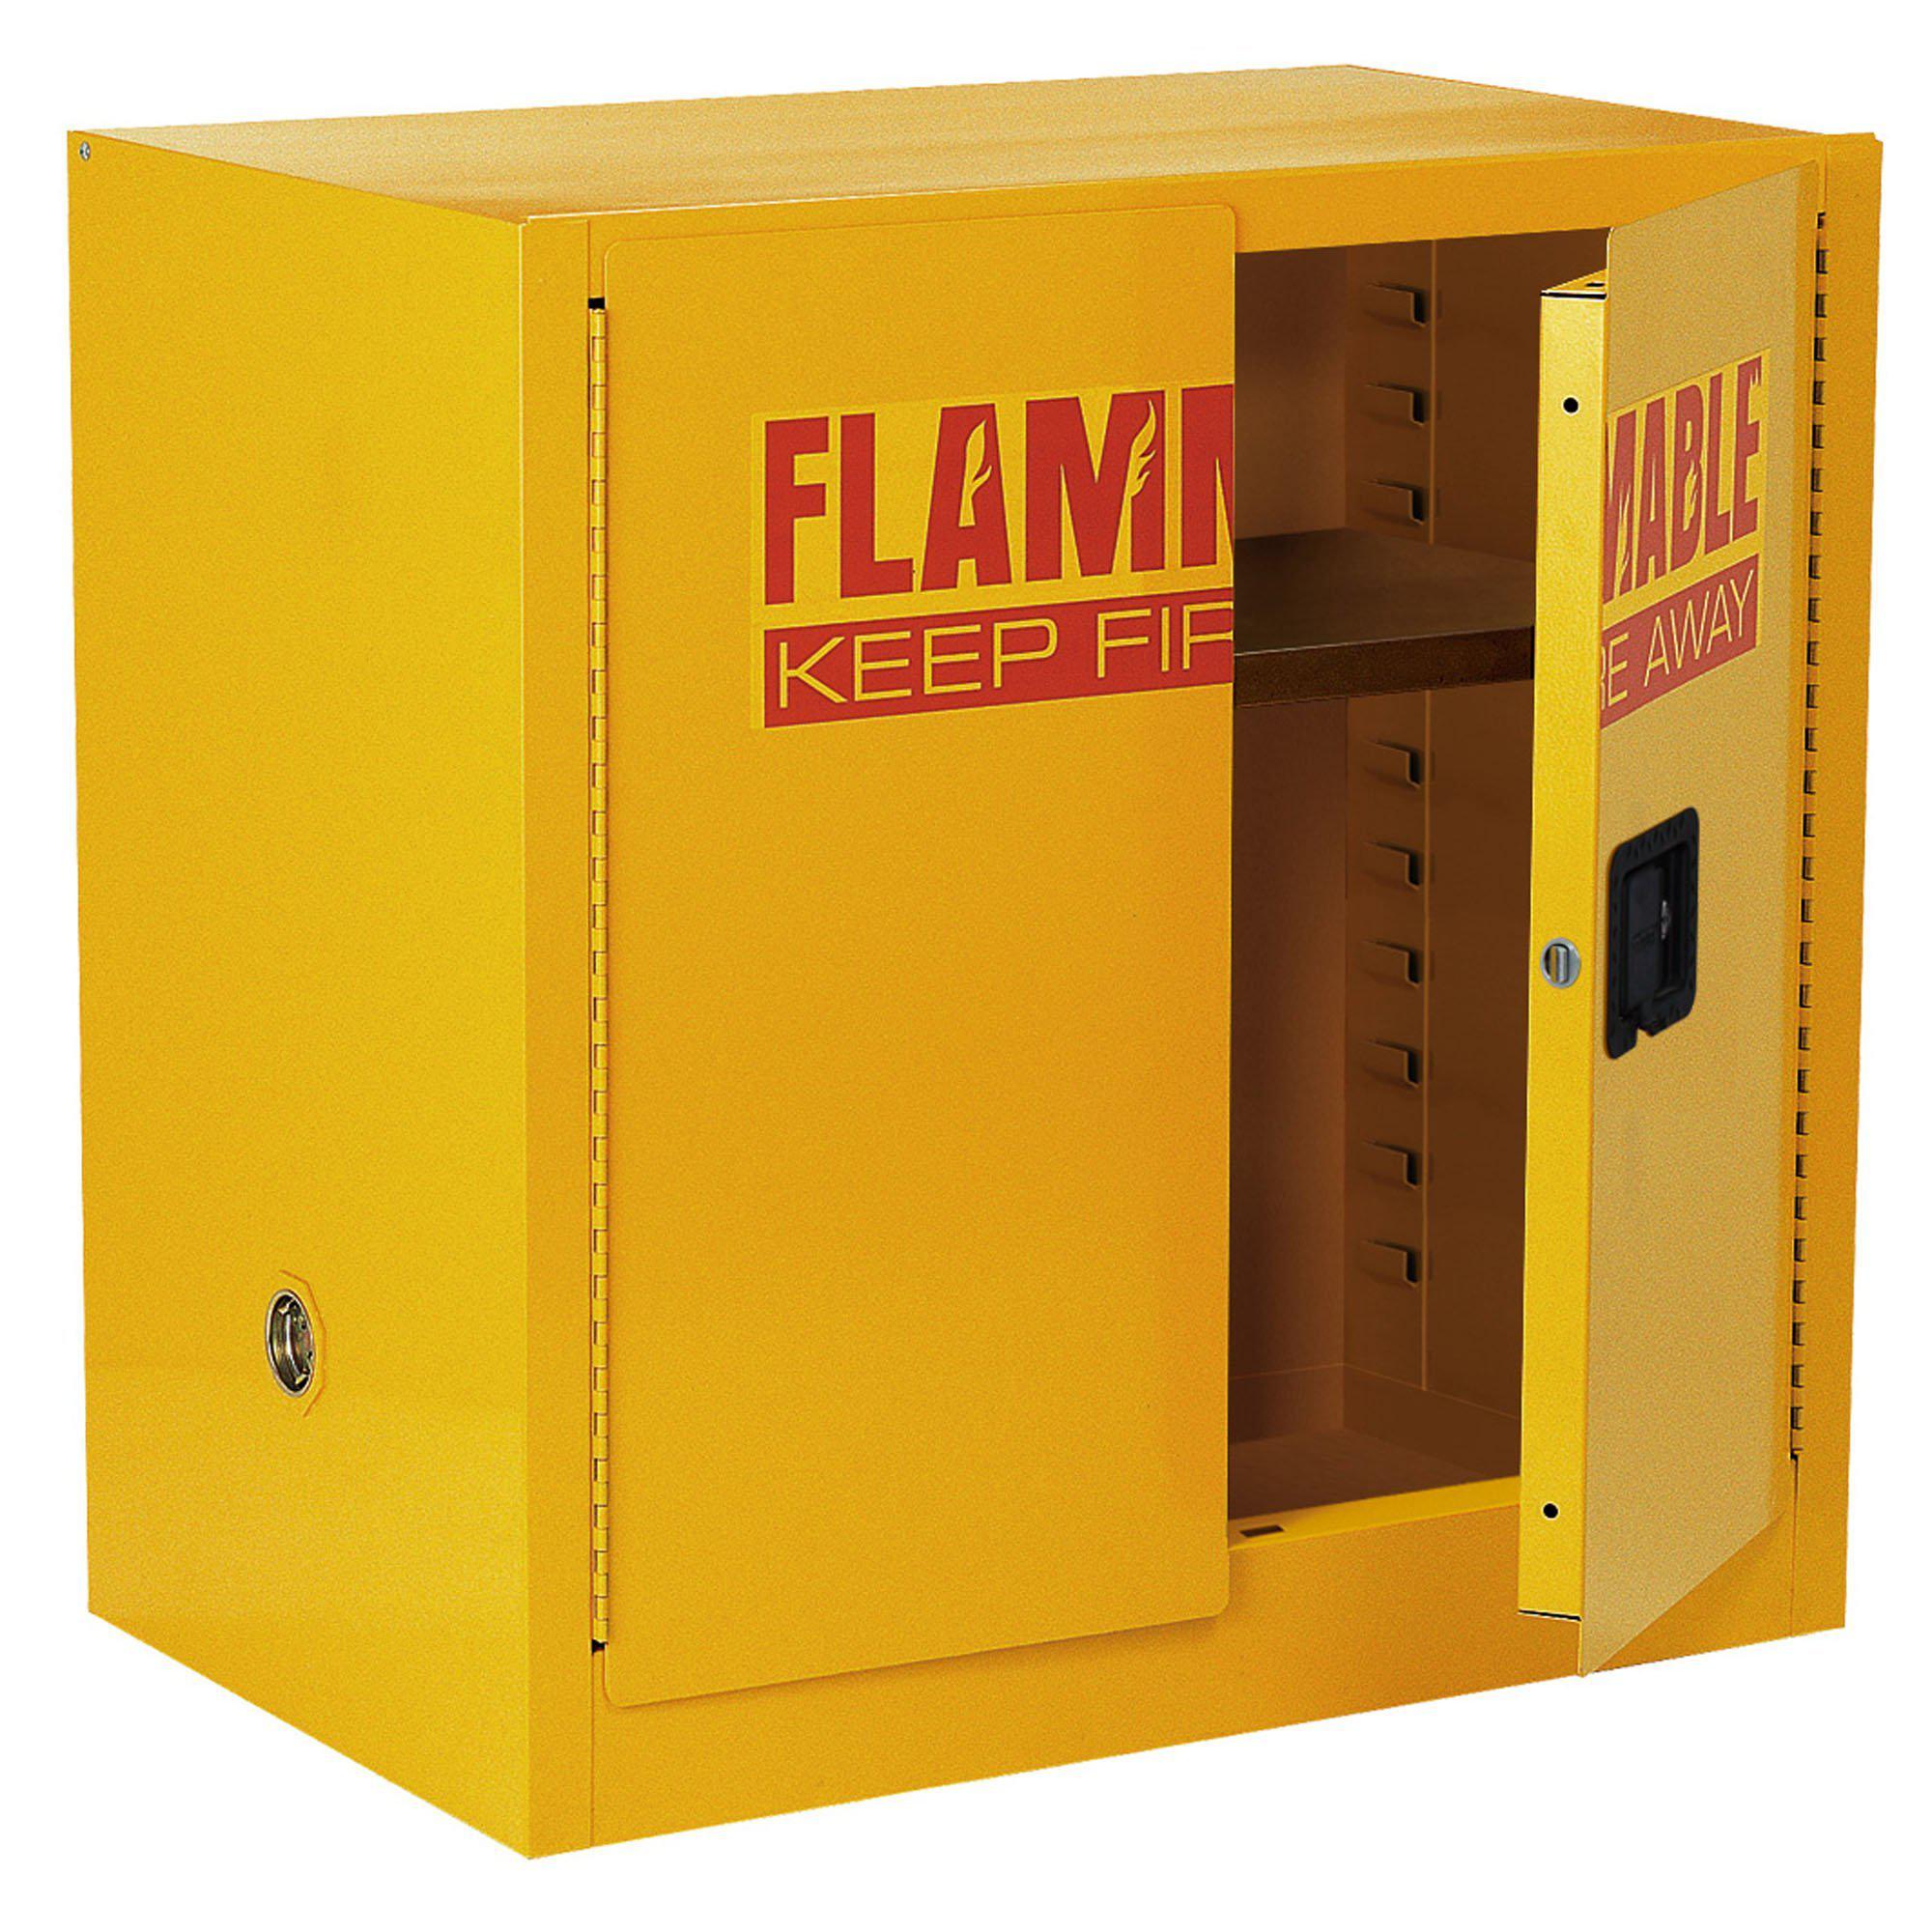 Compact Flammable Safety Cabinet with Double Door, Manual Close, 22 Gallon Capacity, Safety Yellow, 35 x 22 x 35